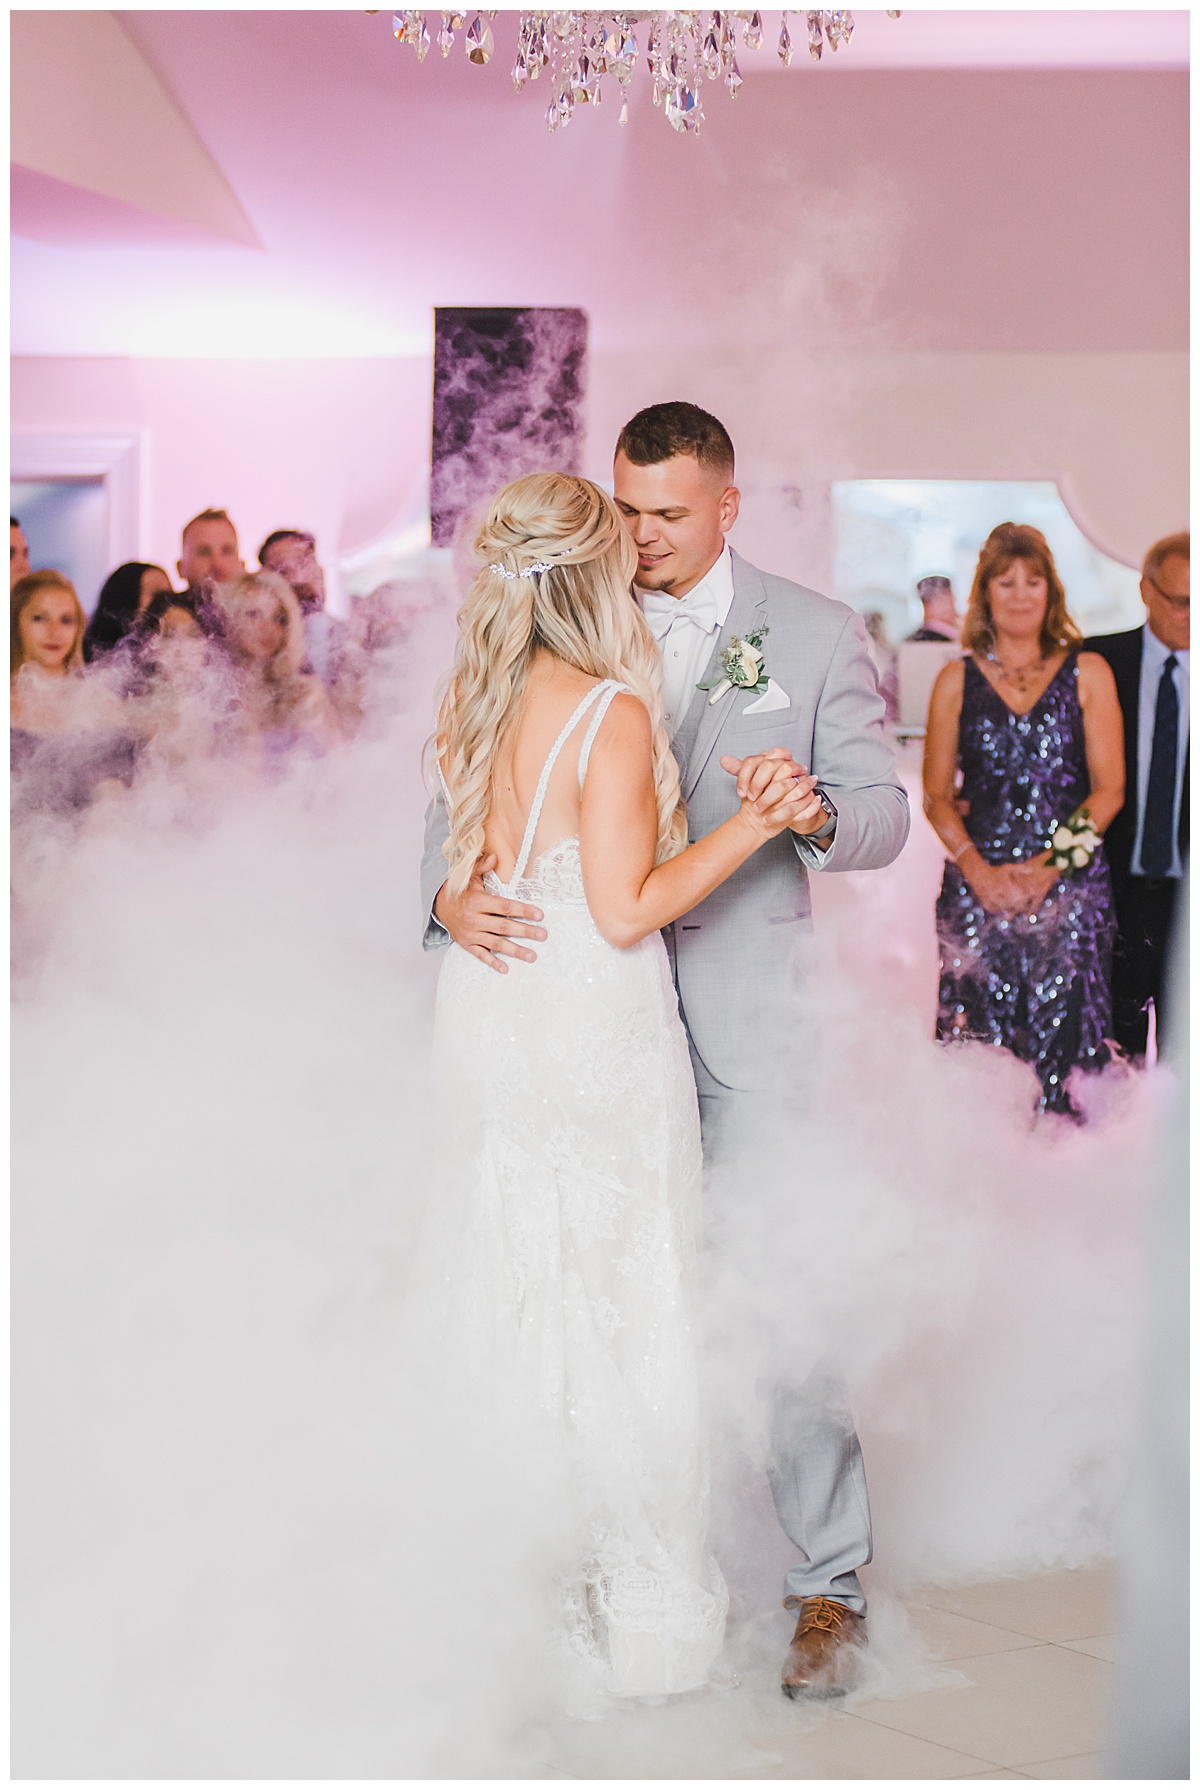 Bride and Groom First Dance on Clouds 